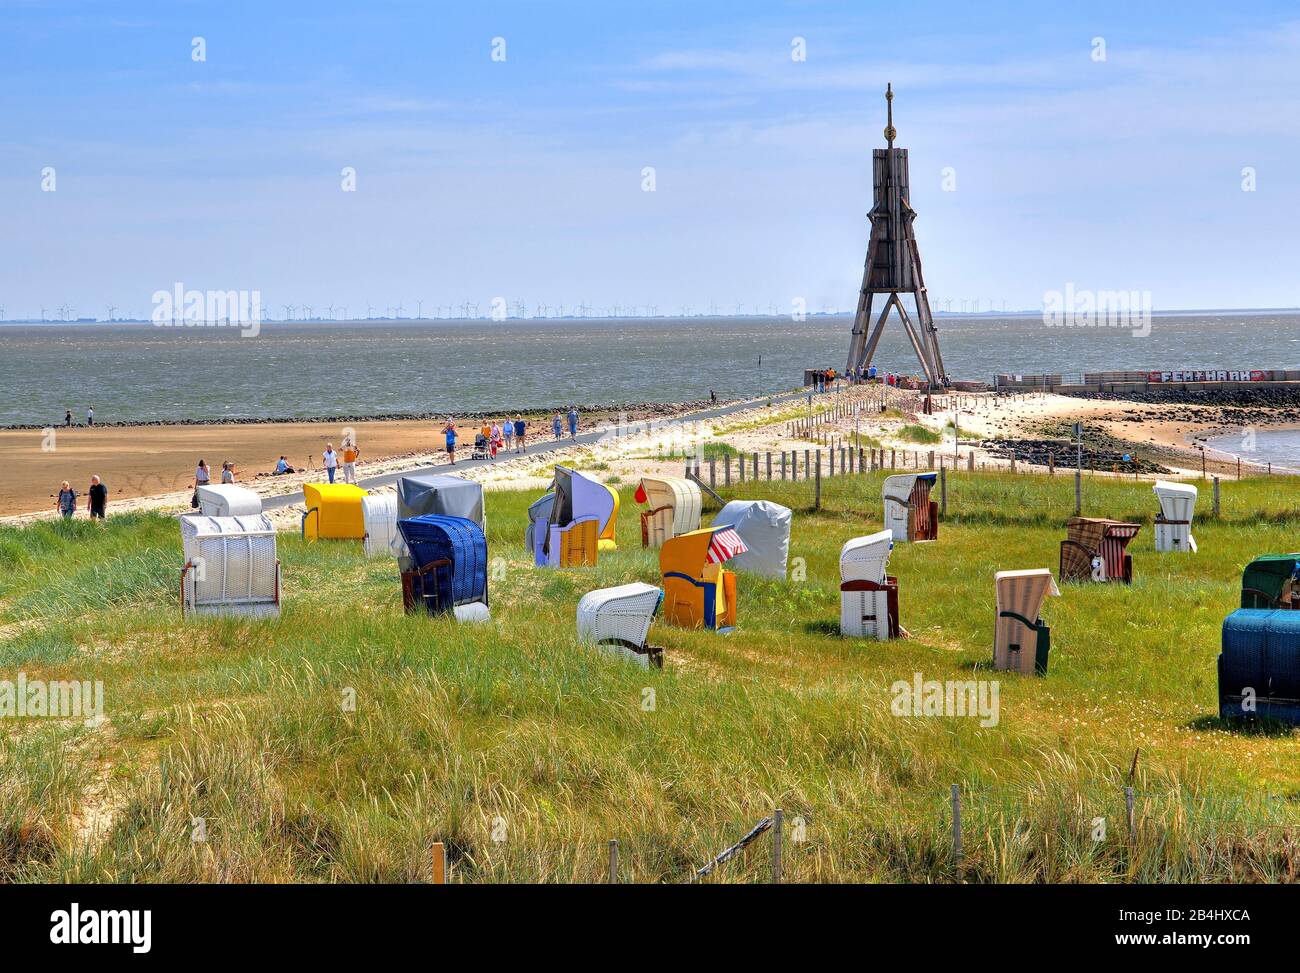 Grass beach with beach chairs at the mouth of the Elbe with sea sign Kugelbake In the district Döse, North Sea resort Cuxhaven, Elbe estuary, North Sea, North Sea coast, Lower Saxony, Germany Stock Photo